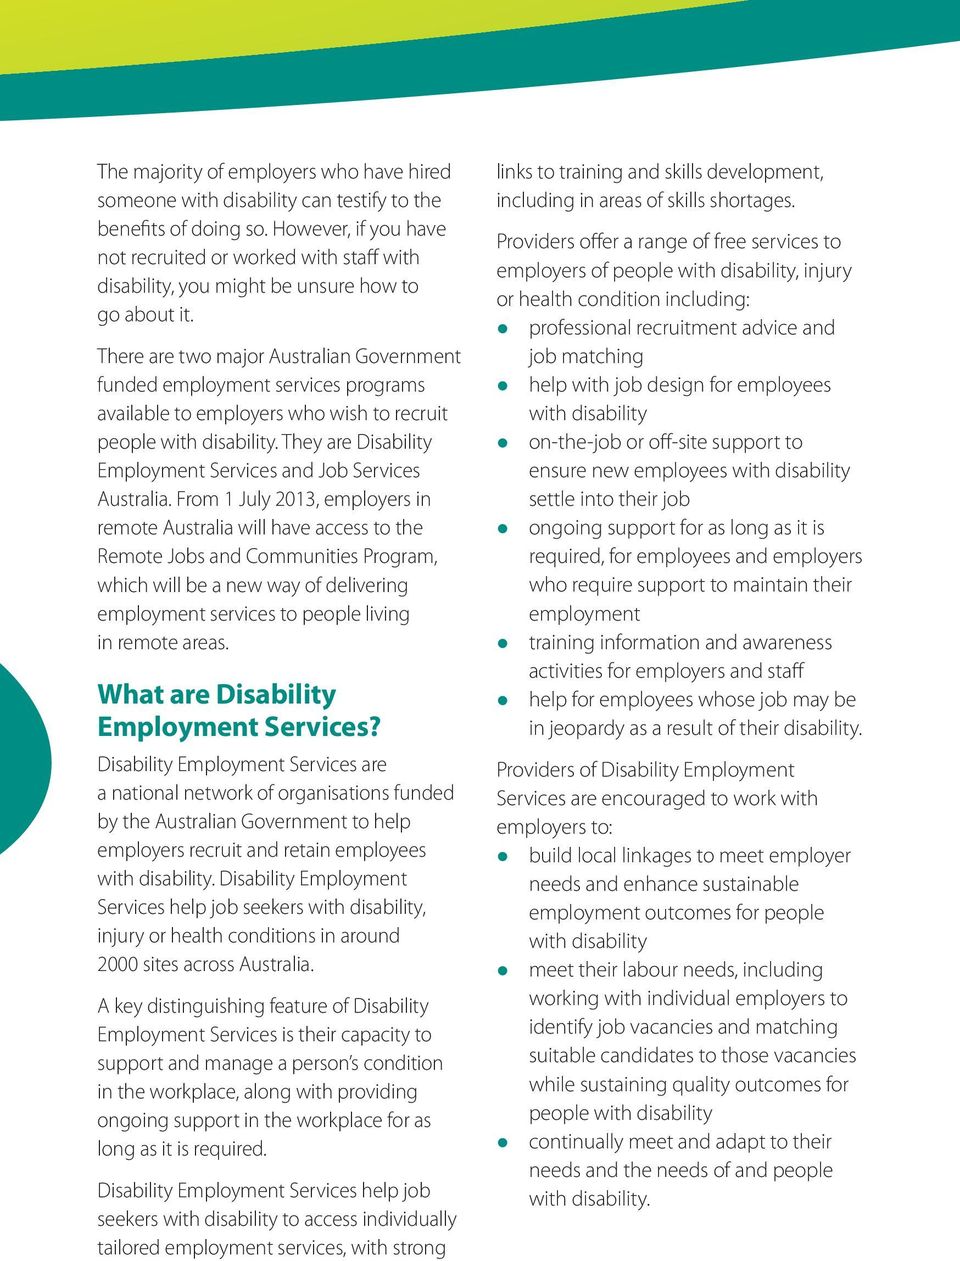 There are two major Australian Government funded employment services programs available to employers who wish to recruit people. They are Disability Employment Services and Job Services Australia.